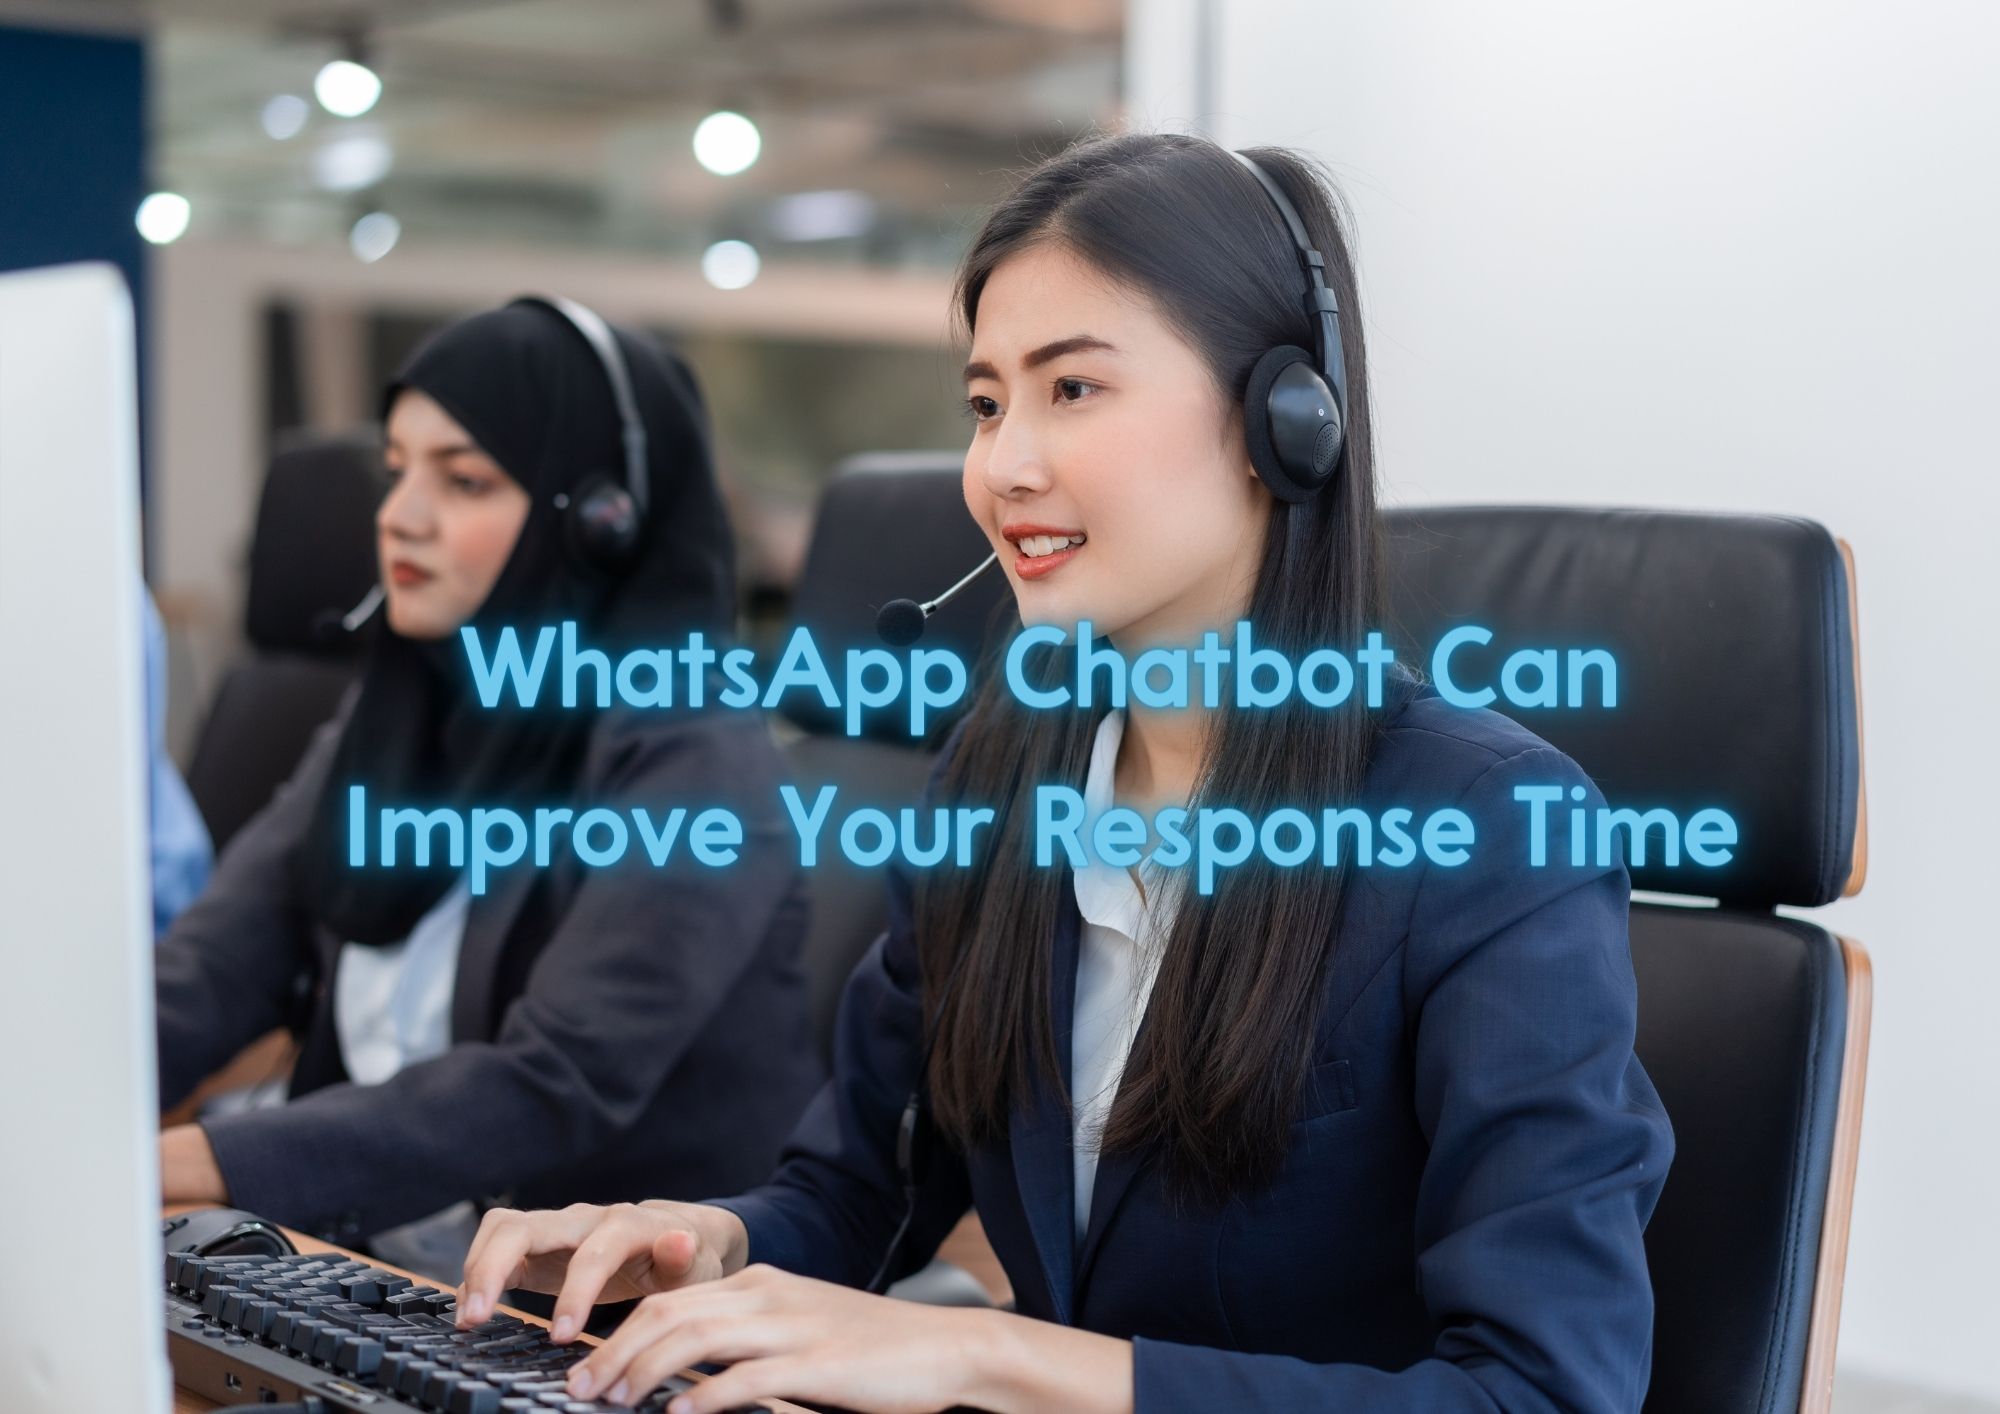 Streamlining Customer Support-How a WhatsApp Chatbot Can Improve Your Response Time